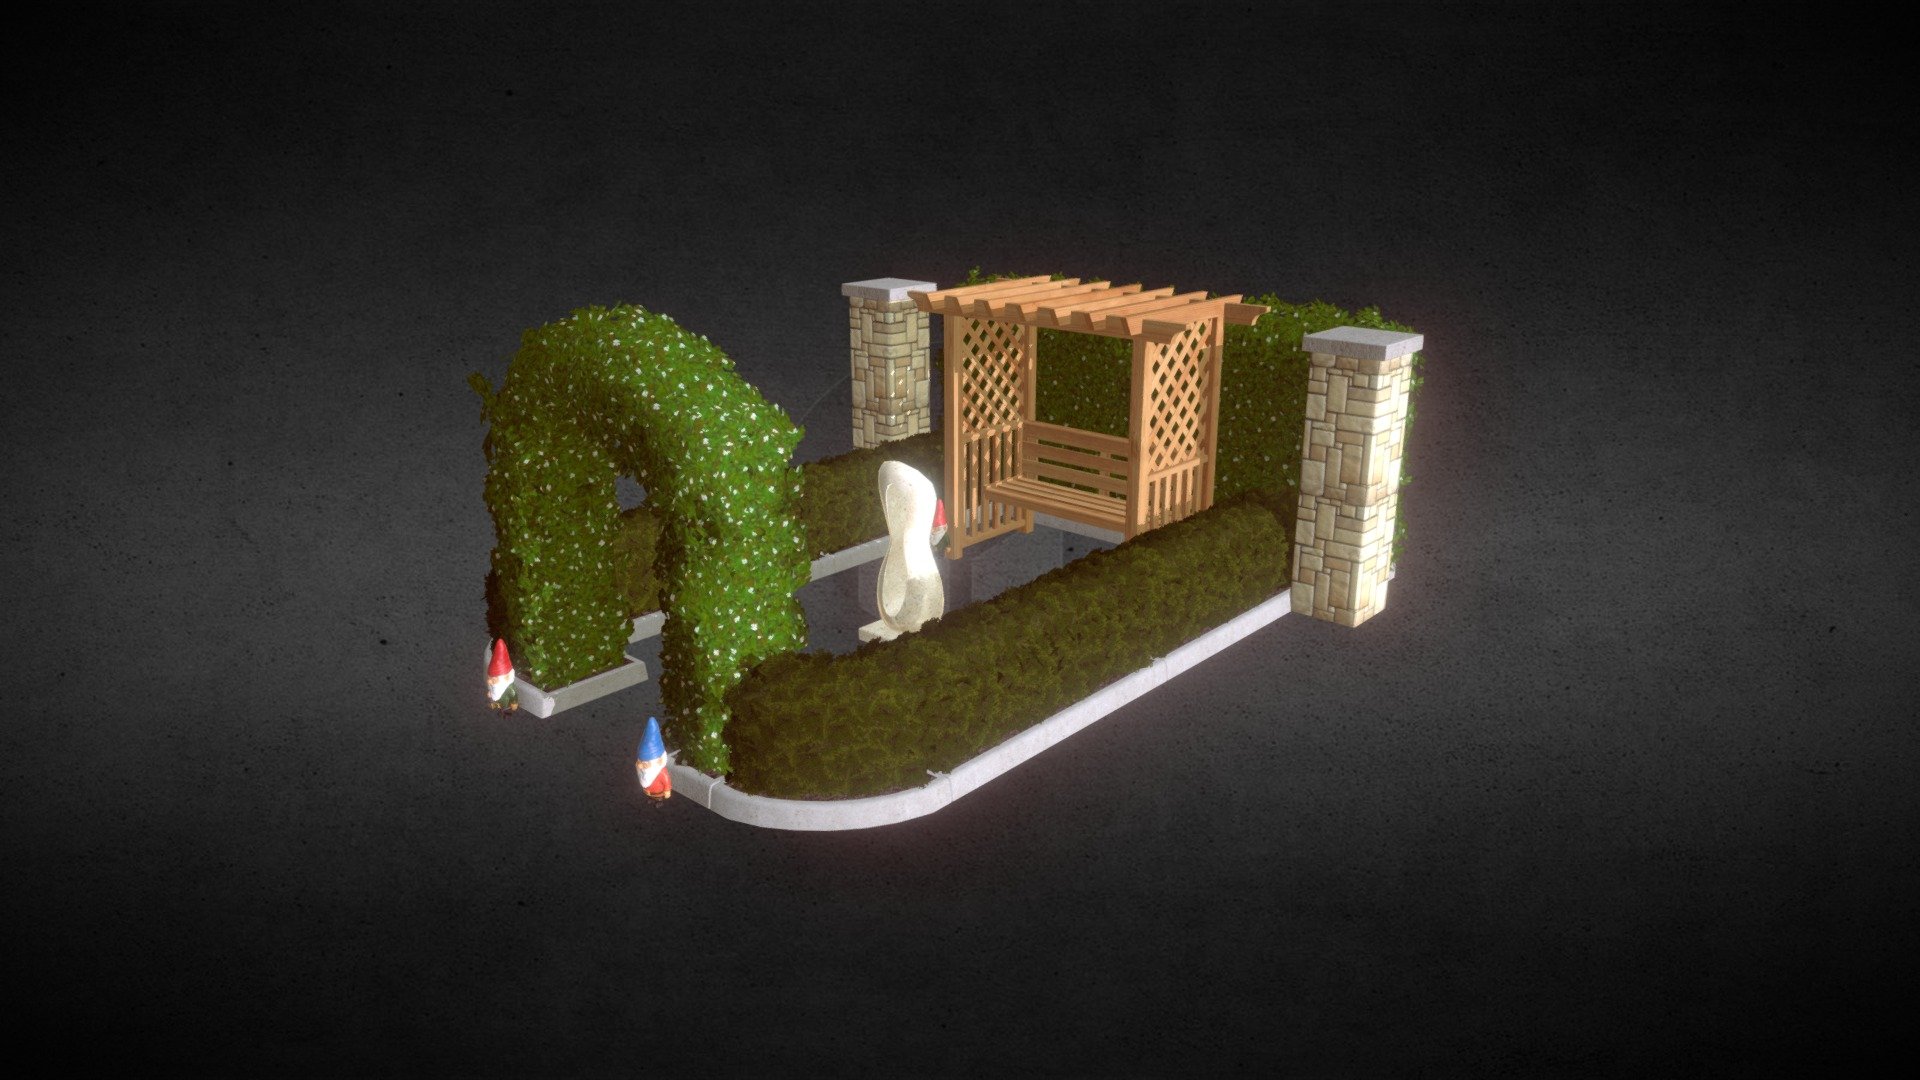 Part of Garden Decorations - available on unity asset store - Garden Decorations - 3D model by Justwo 3d model